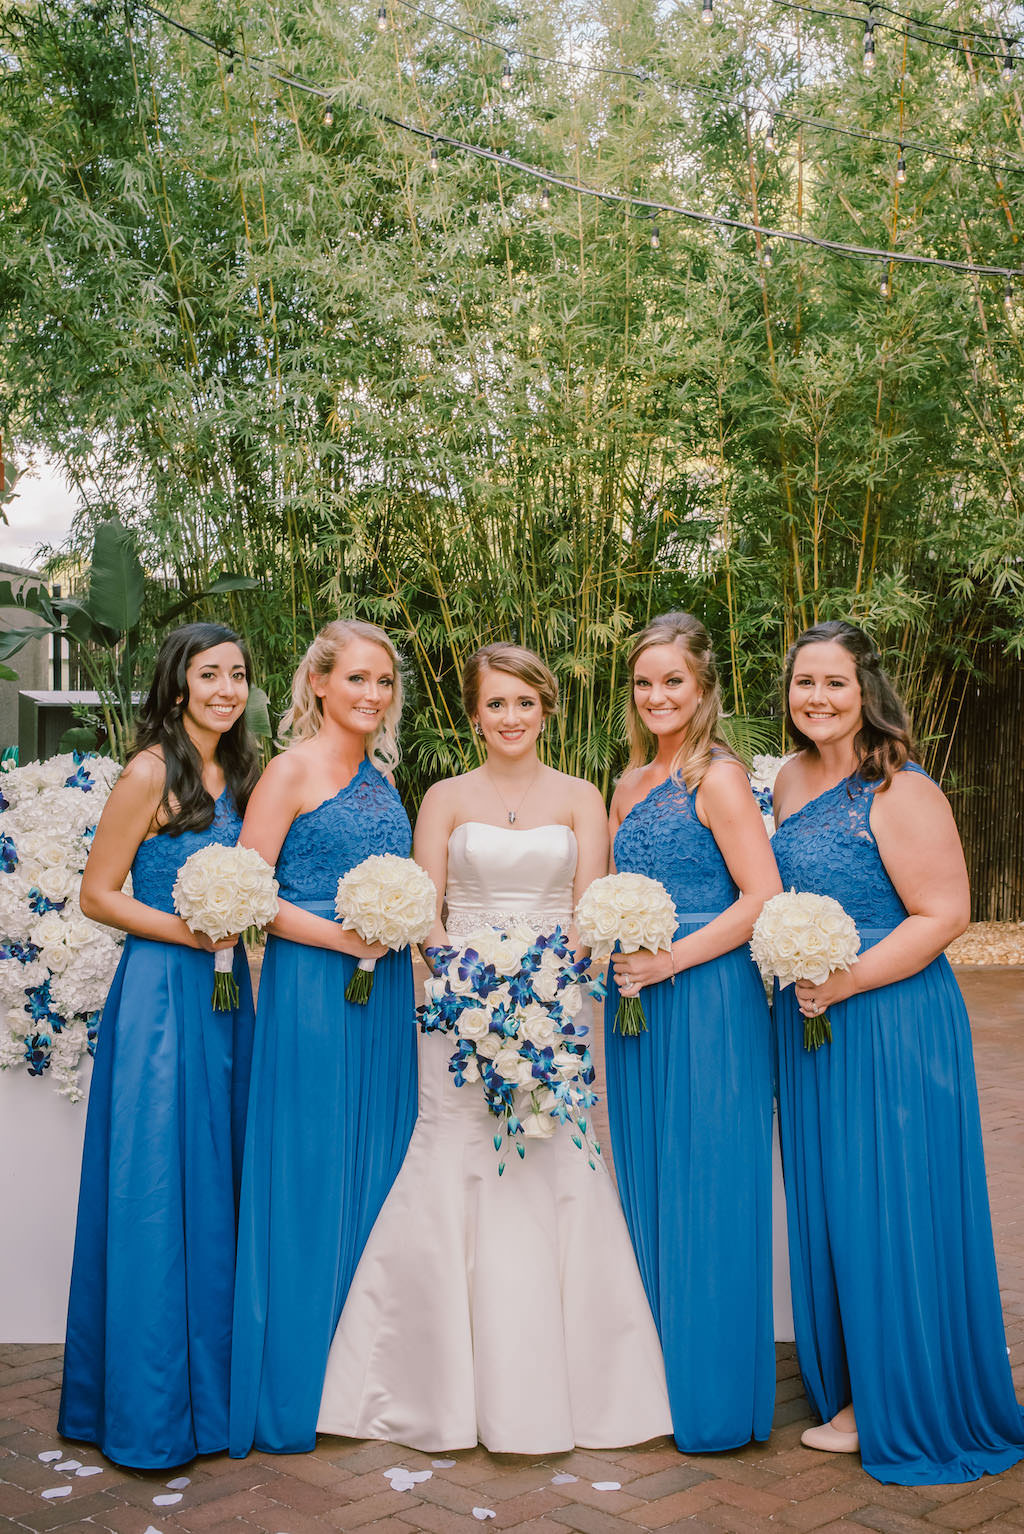 Bride and Bridesmaids Outdoor Bamboo Garden Wedding Portrait, Bridesmaids in Blue Matching Long Dresses, Bride in Strapless Sweetheart Satin Trumpet Wedding Dress, with White and Blue Floral Bouquet | Tampa Bay Wedding Venue NOVA 535